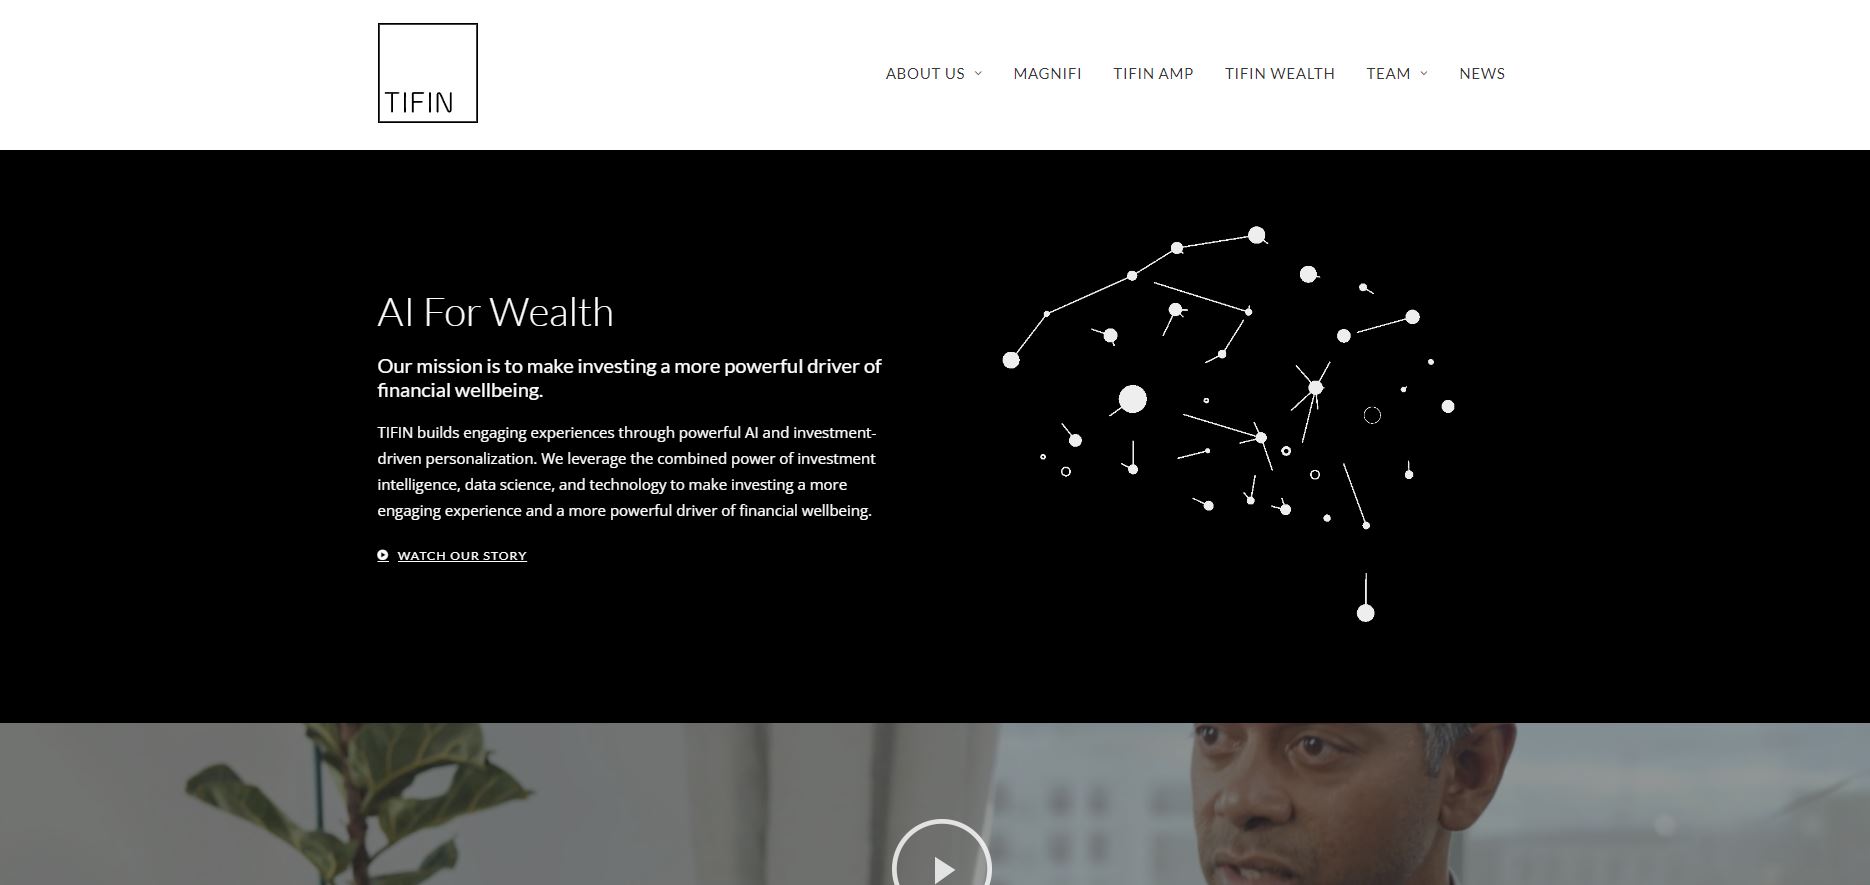 TIFIN is already making waves in the industry with its innovative approach to wealth management